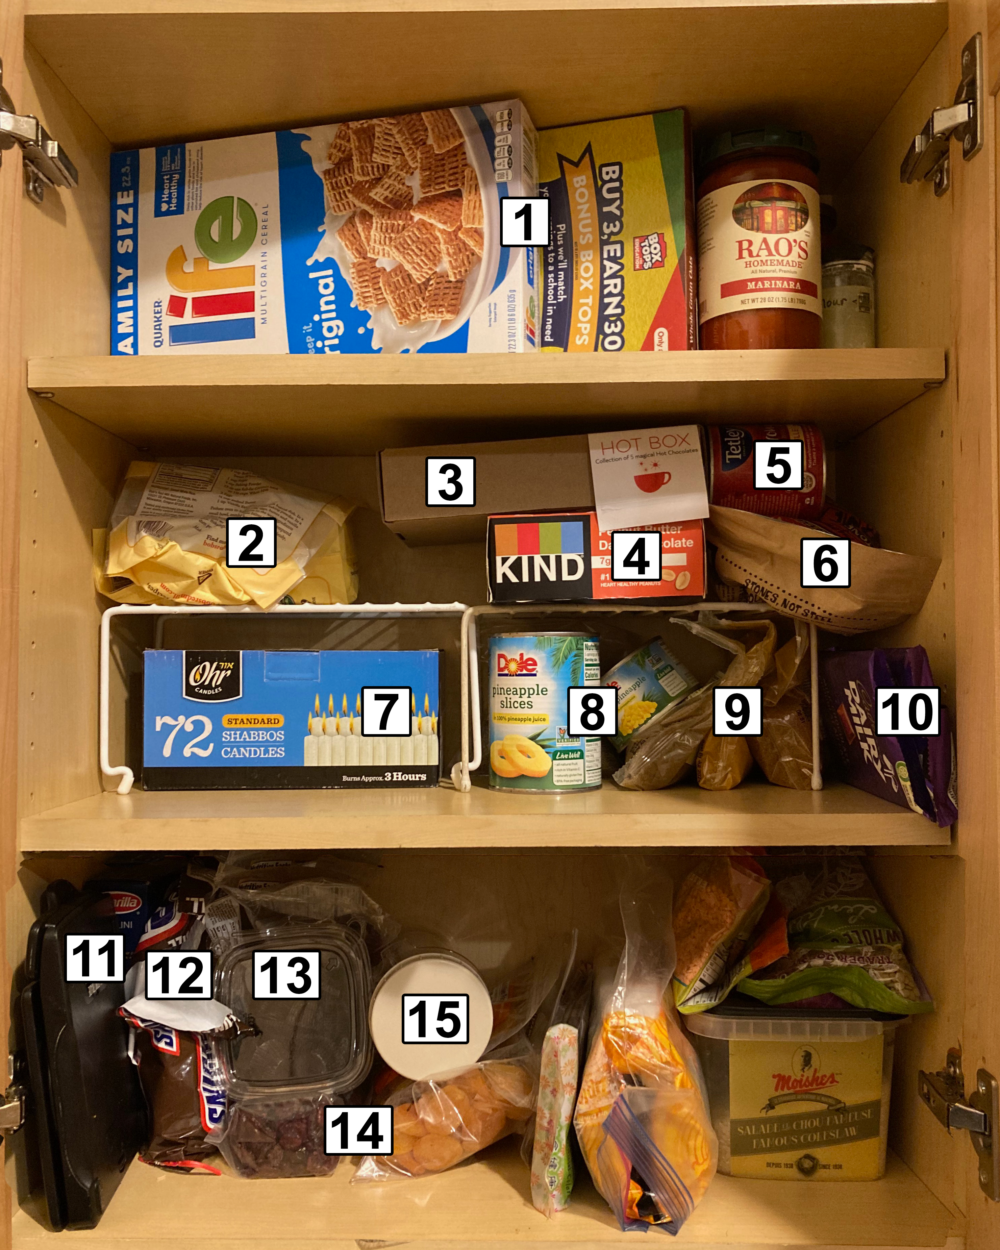 The cabinet with individual items labelled with numbers.